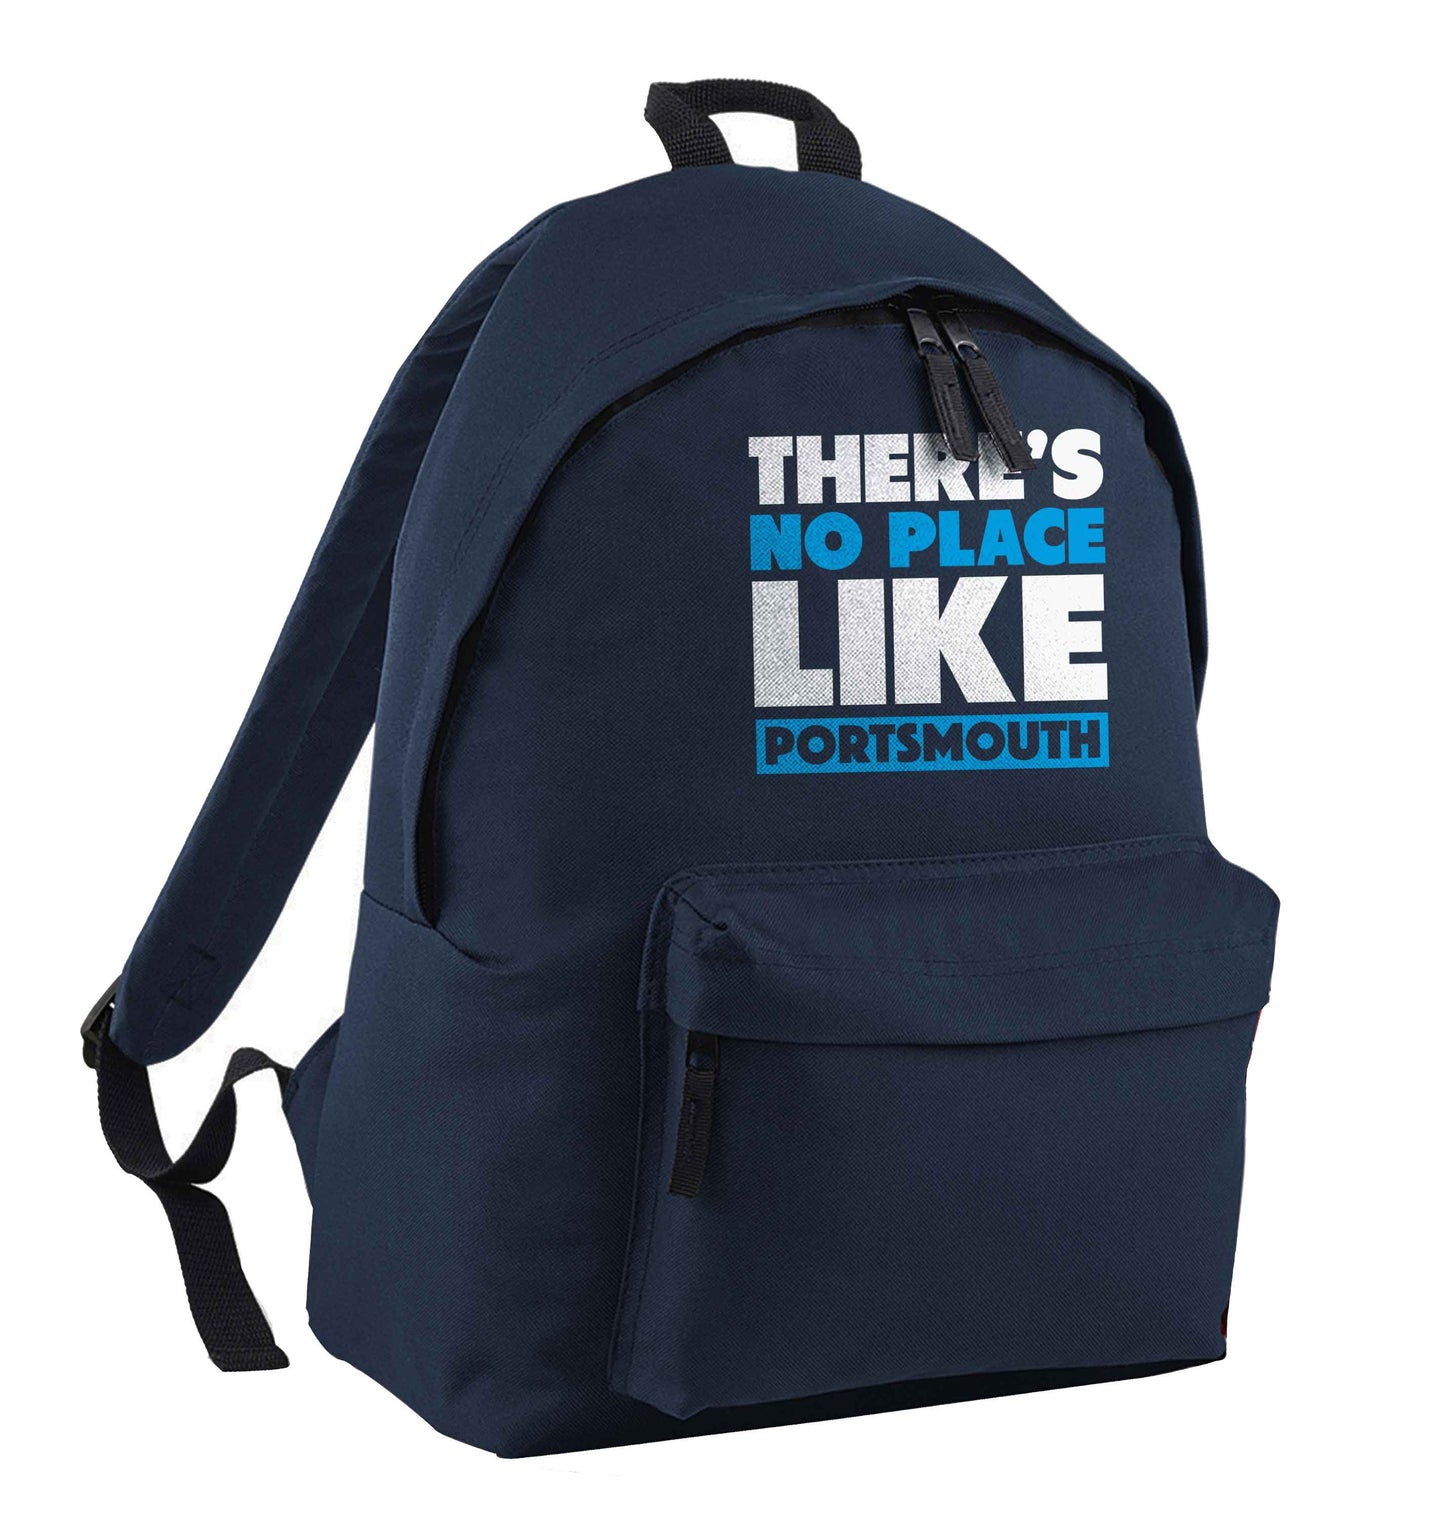 There's no place like Porstmouth navy adults backpack